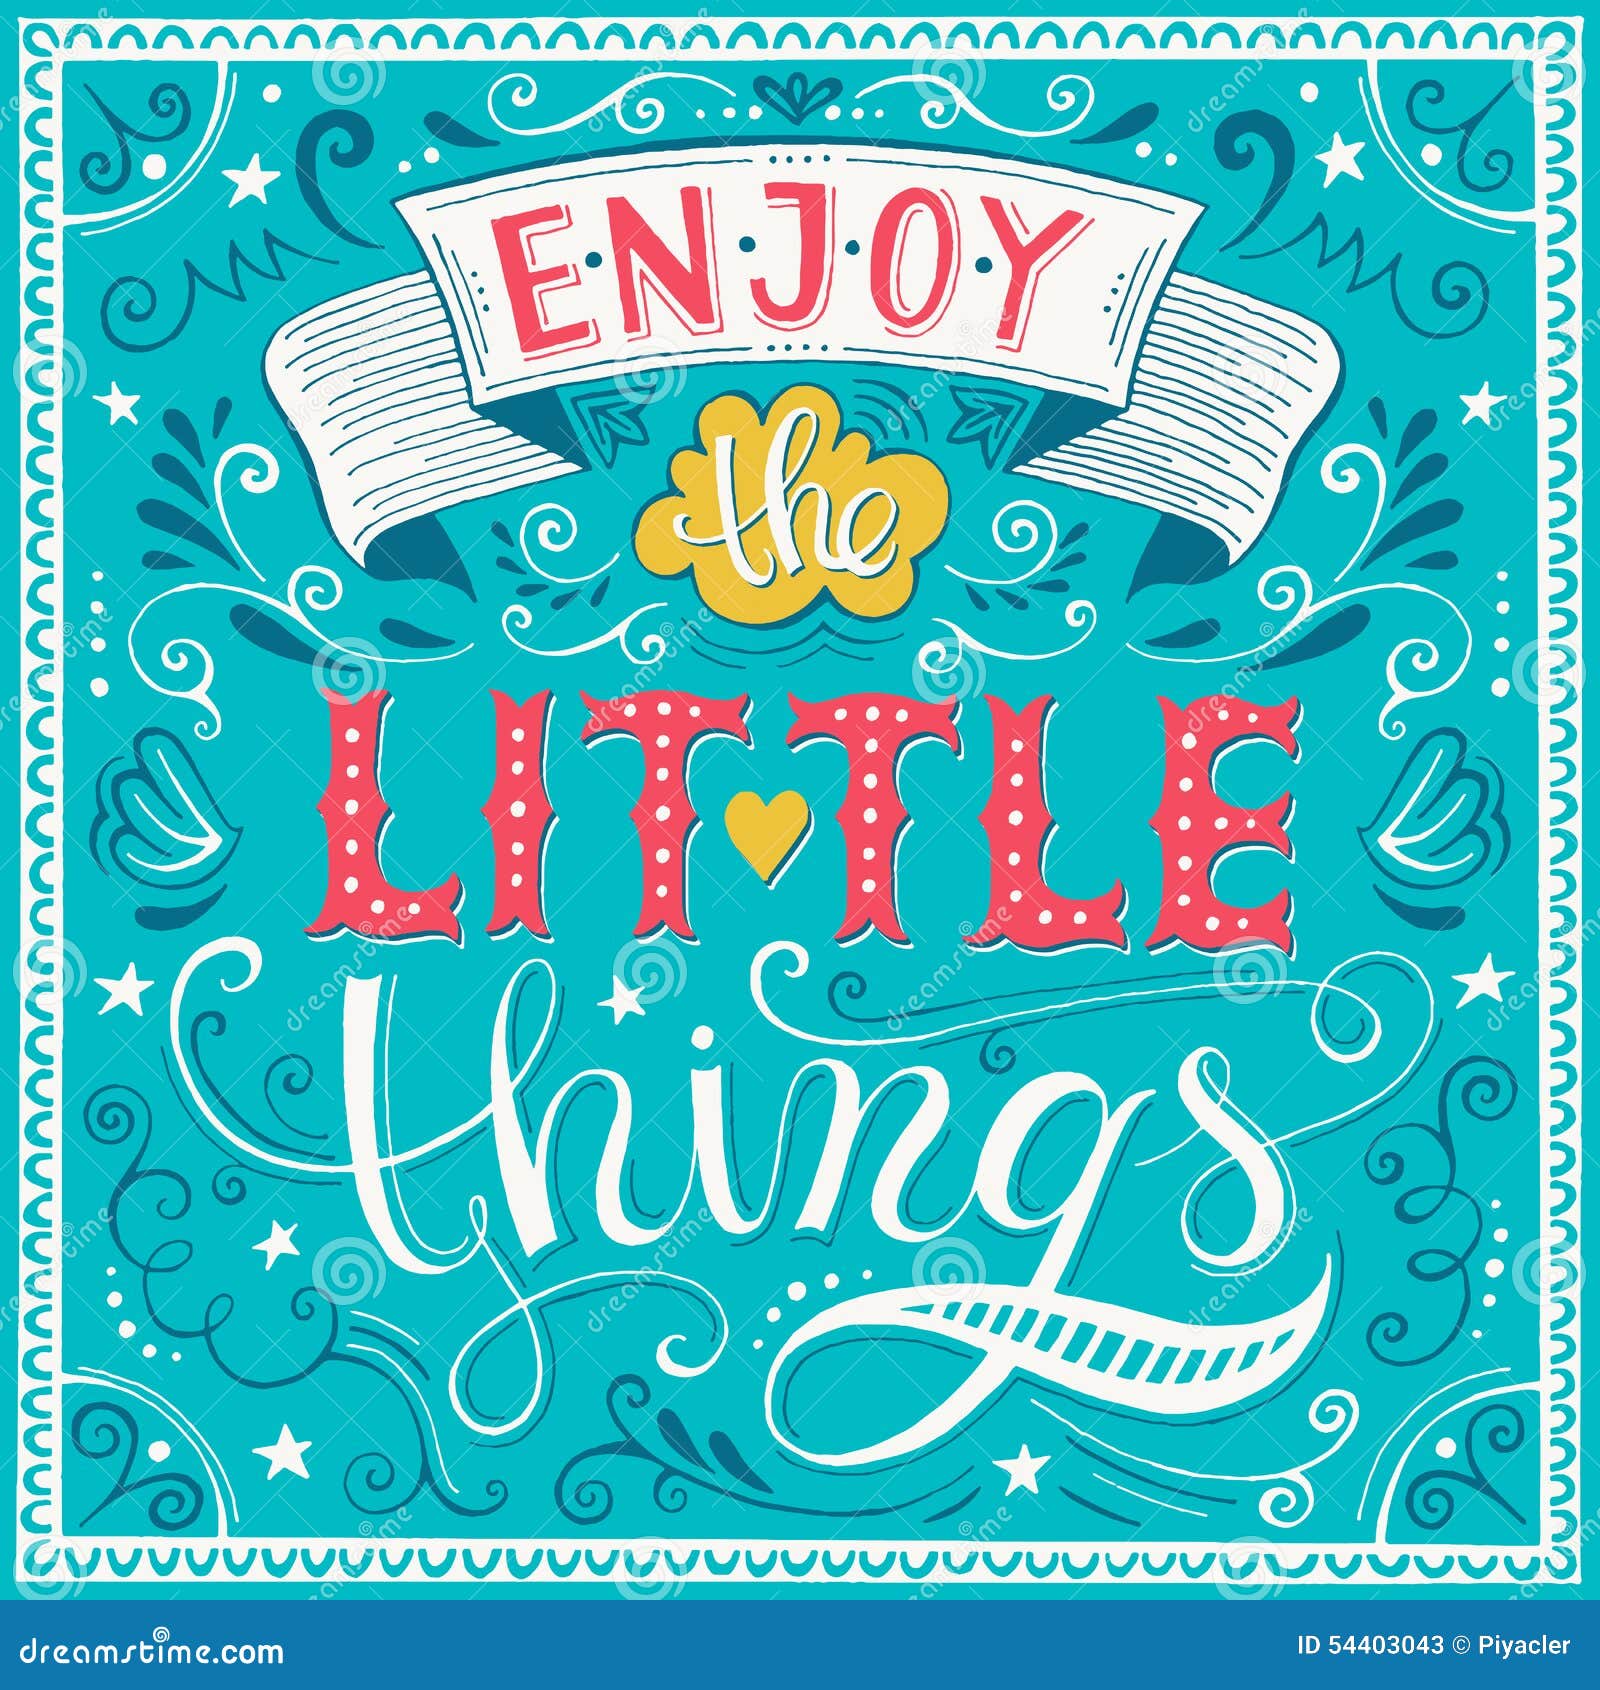 Enjoy The Little Things Stock Vector - Image: 54403043